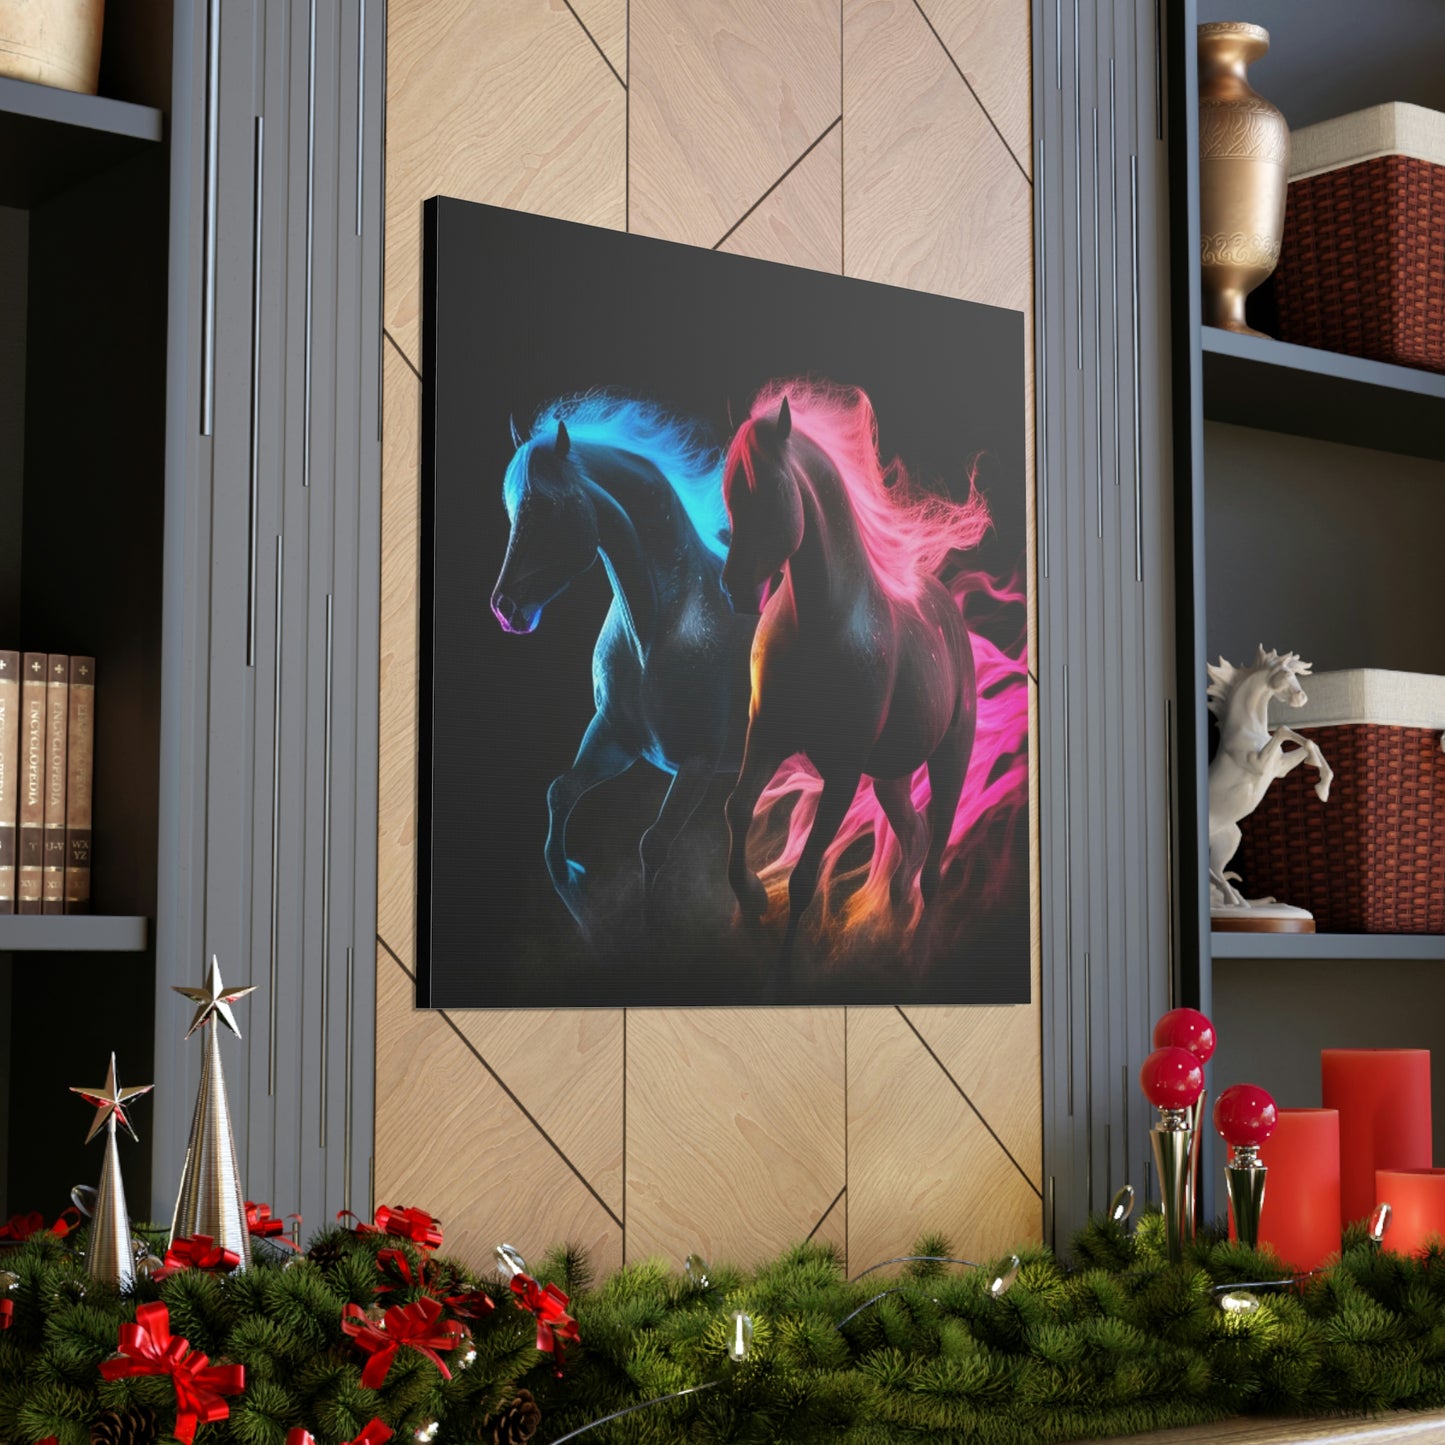 Canvas Gallery Wraps Horses Pink Blue Fire 2